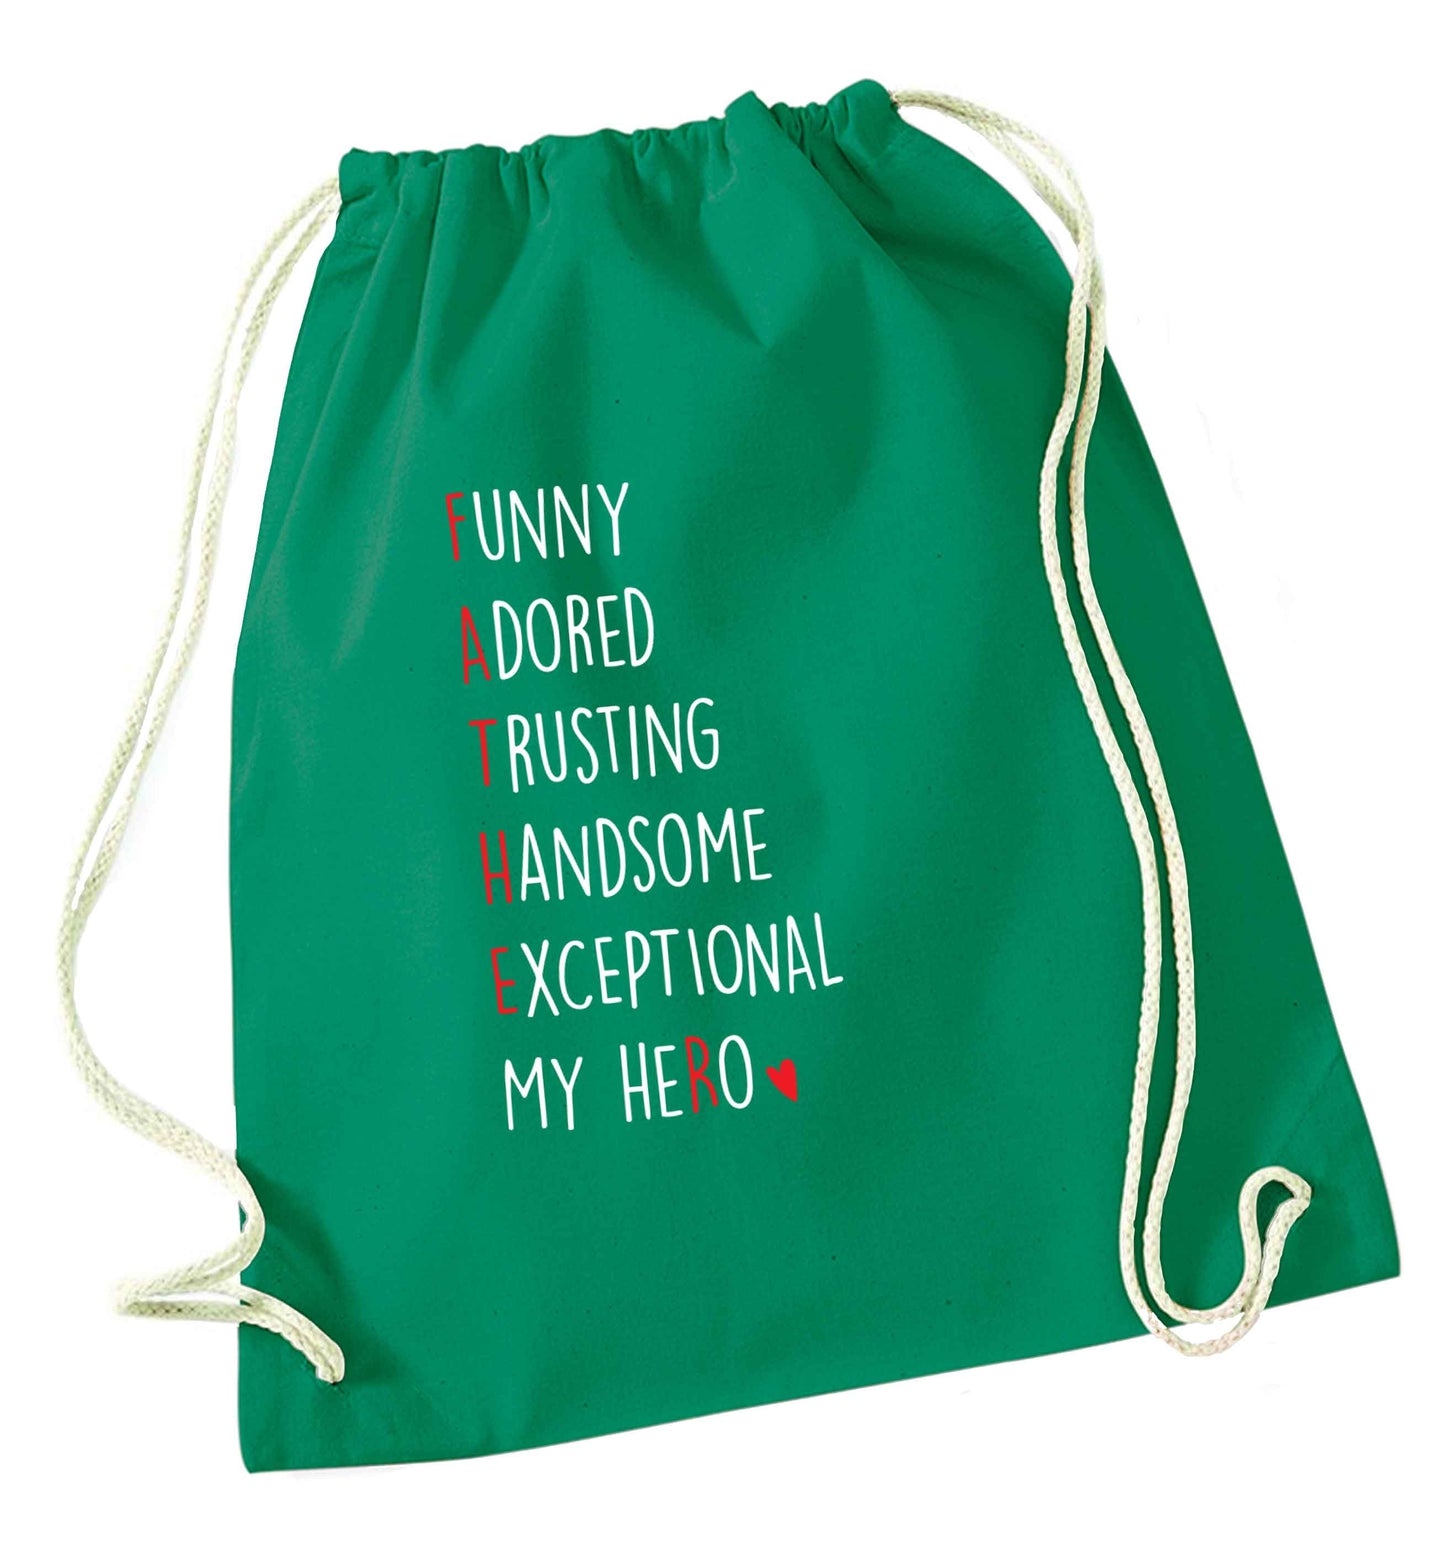 Father meaning hero acrostic poem green drawstring bag